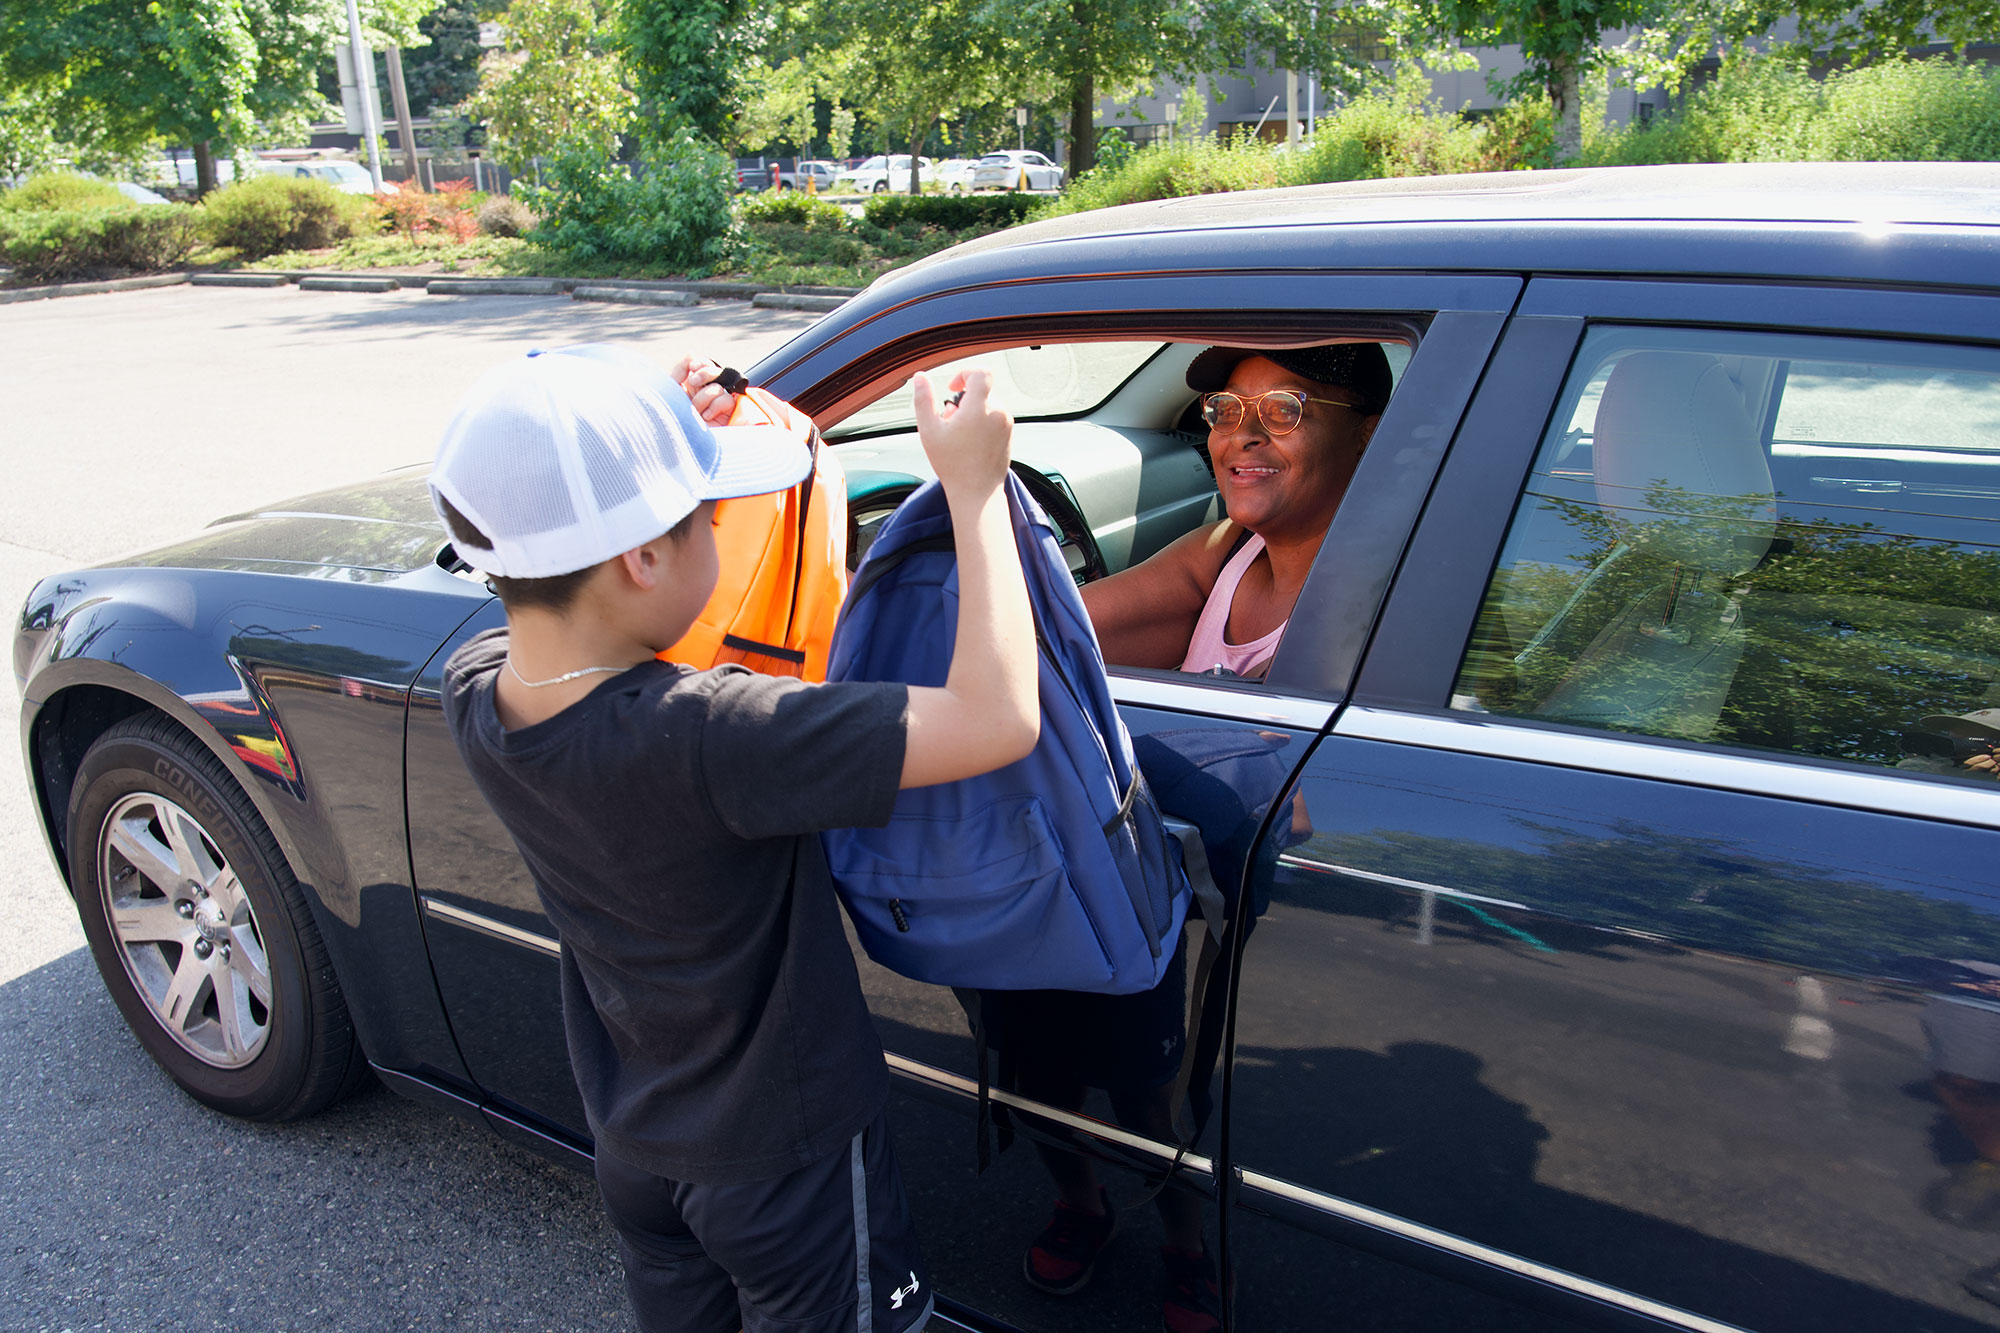 Kid showing two backpacks to a person in a black car